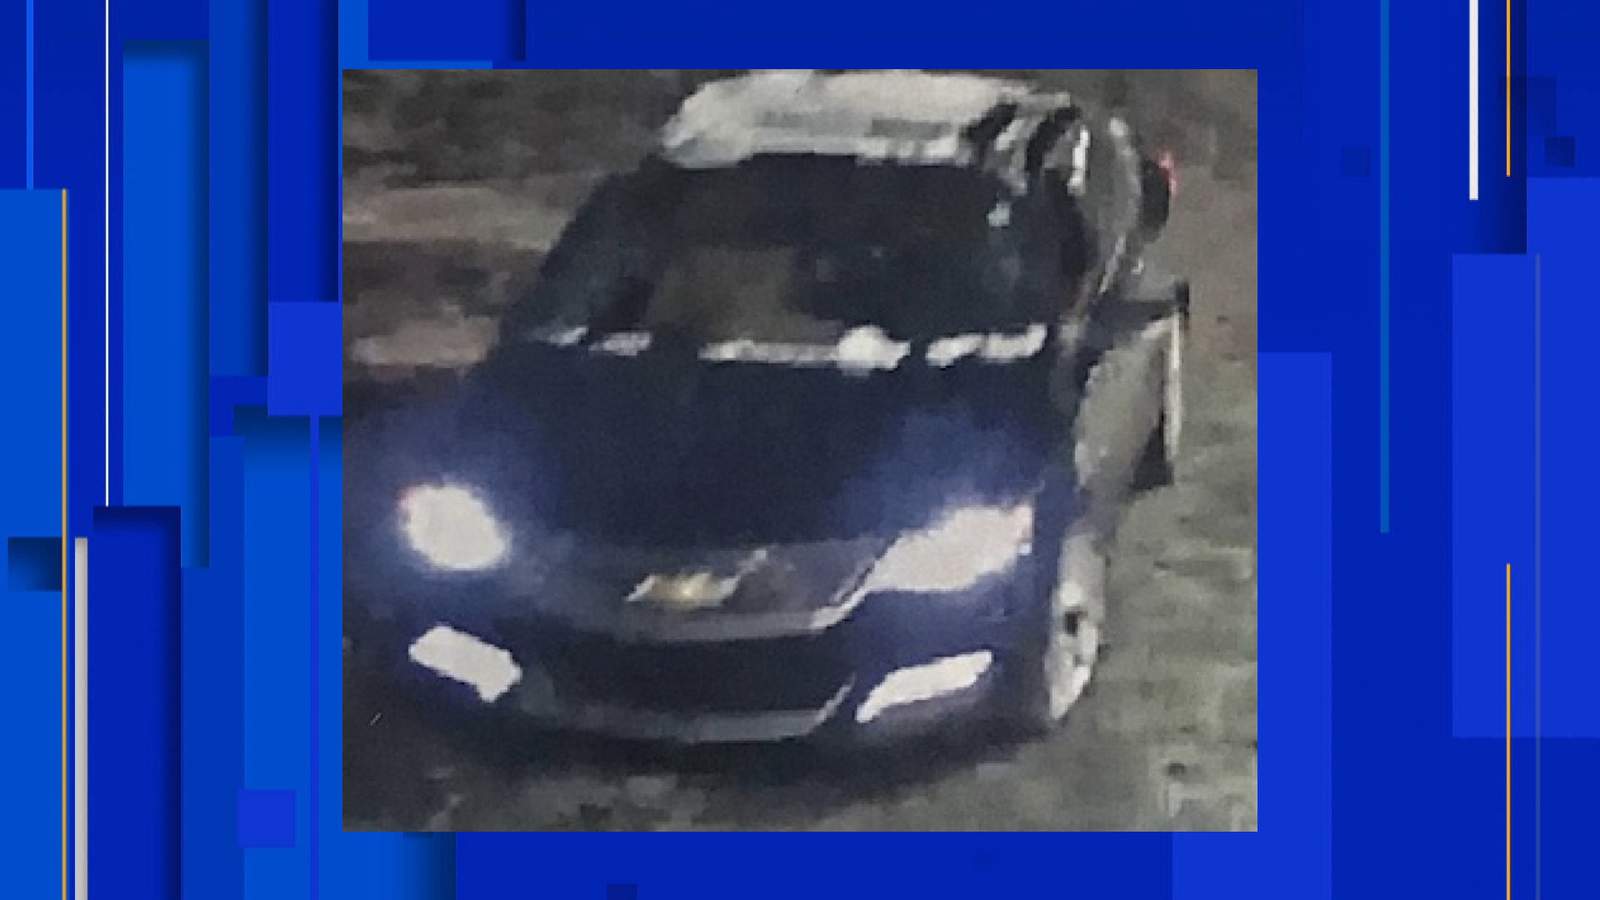 Detroit police search for suspect, vehicle in connection with deadly shooting on city’s west side